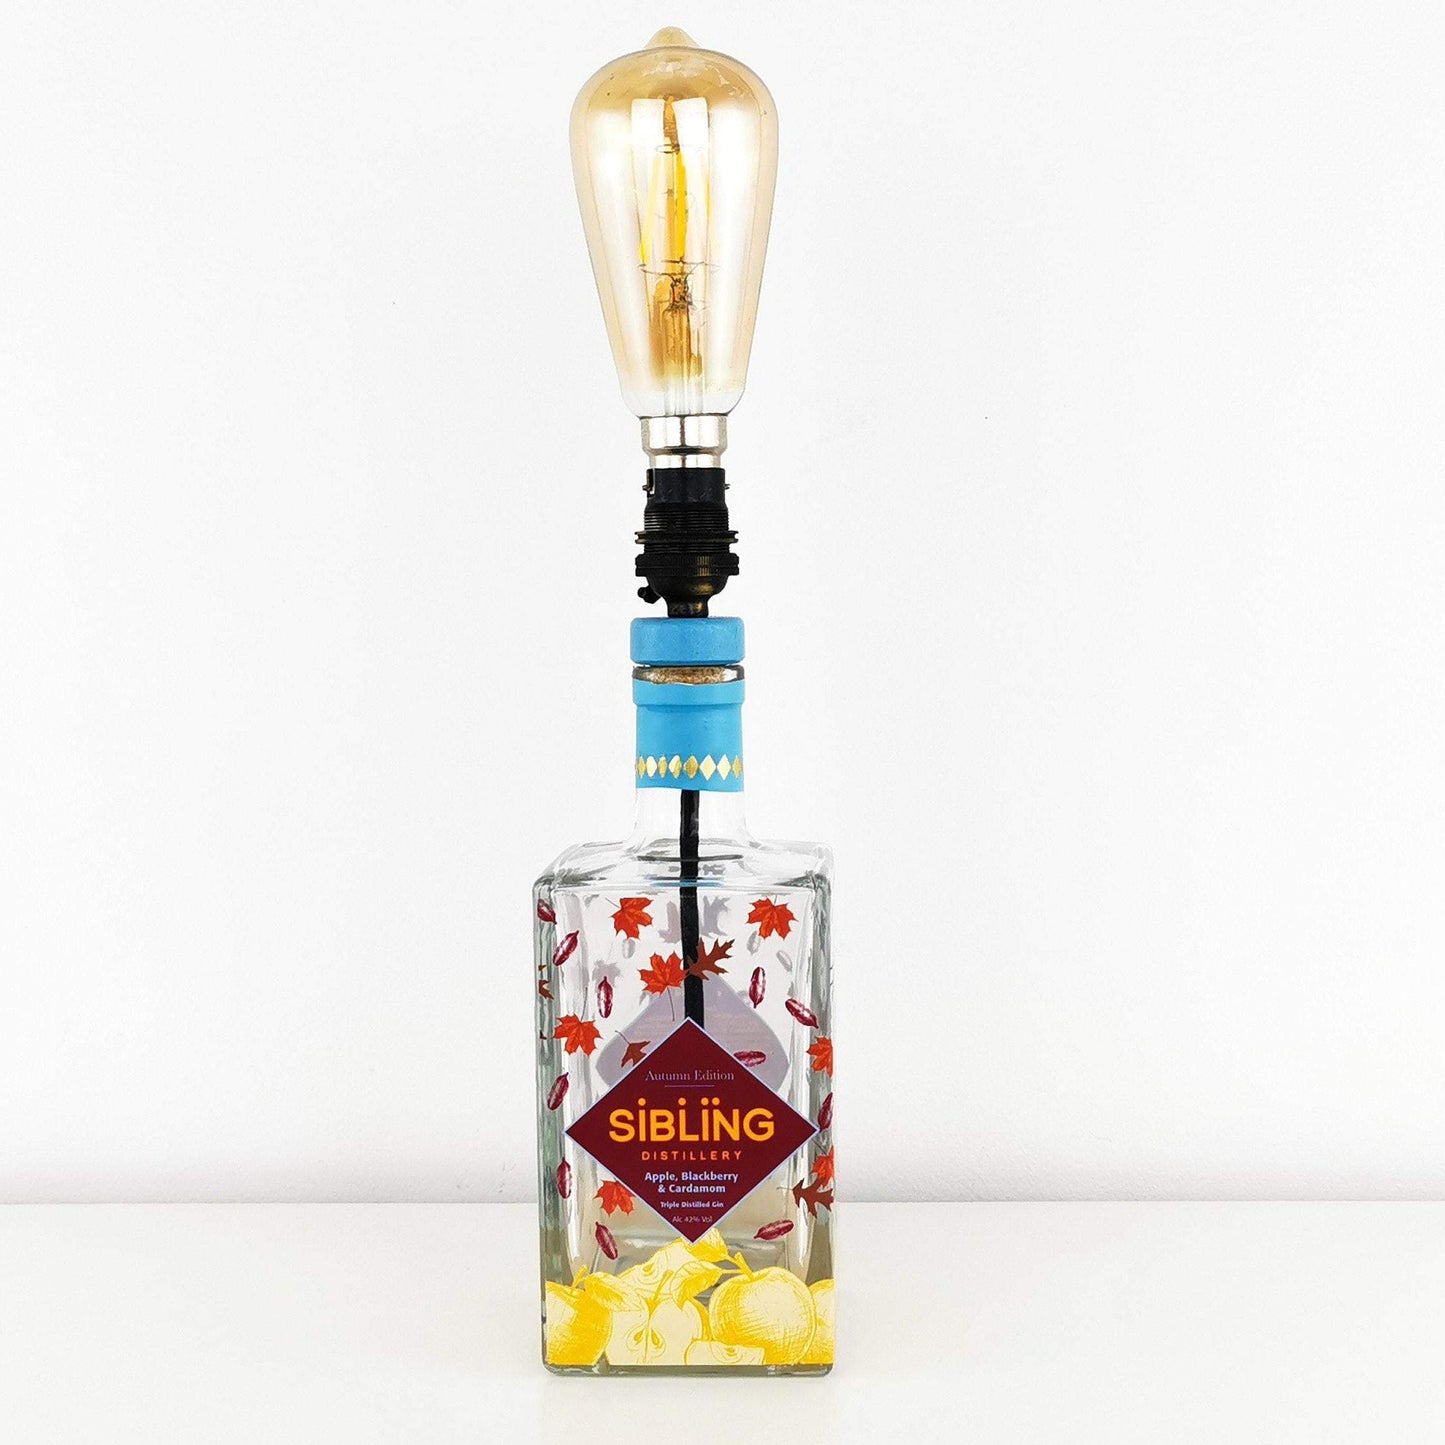 Sibling Gin Bottle Table Lamp Gin Bottle Table Lamps